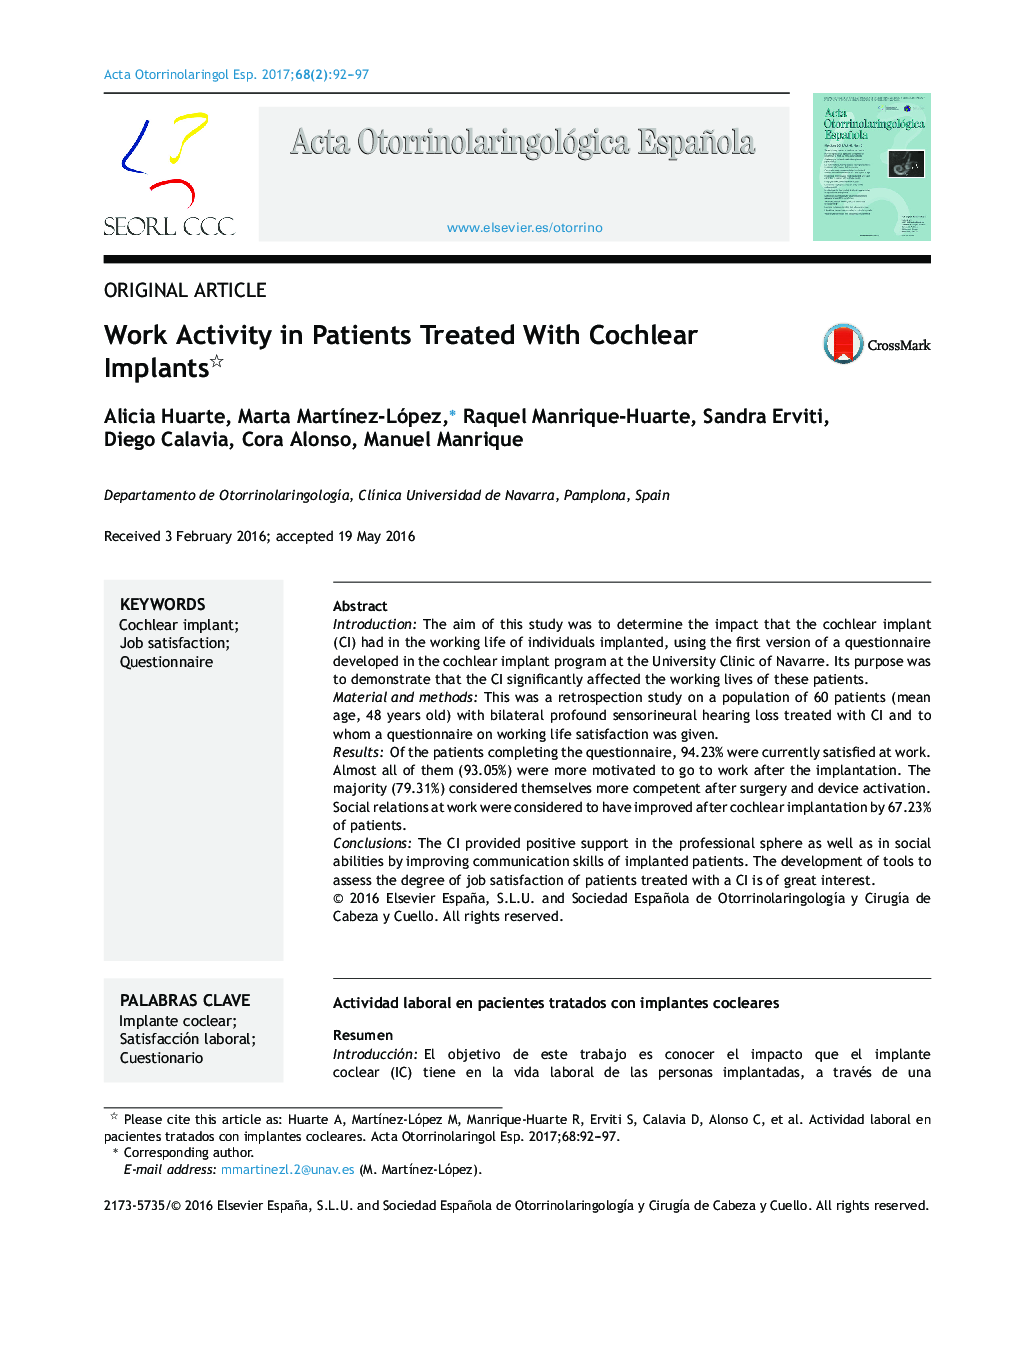 Work Activity in Patients Treated With Cochlear Implants